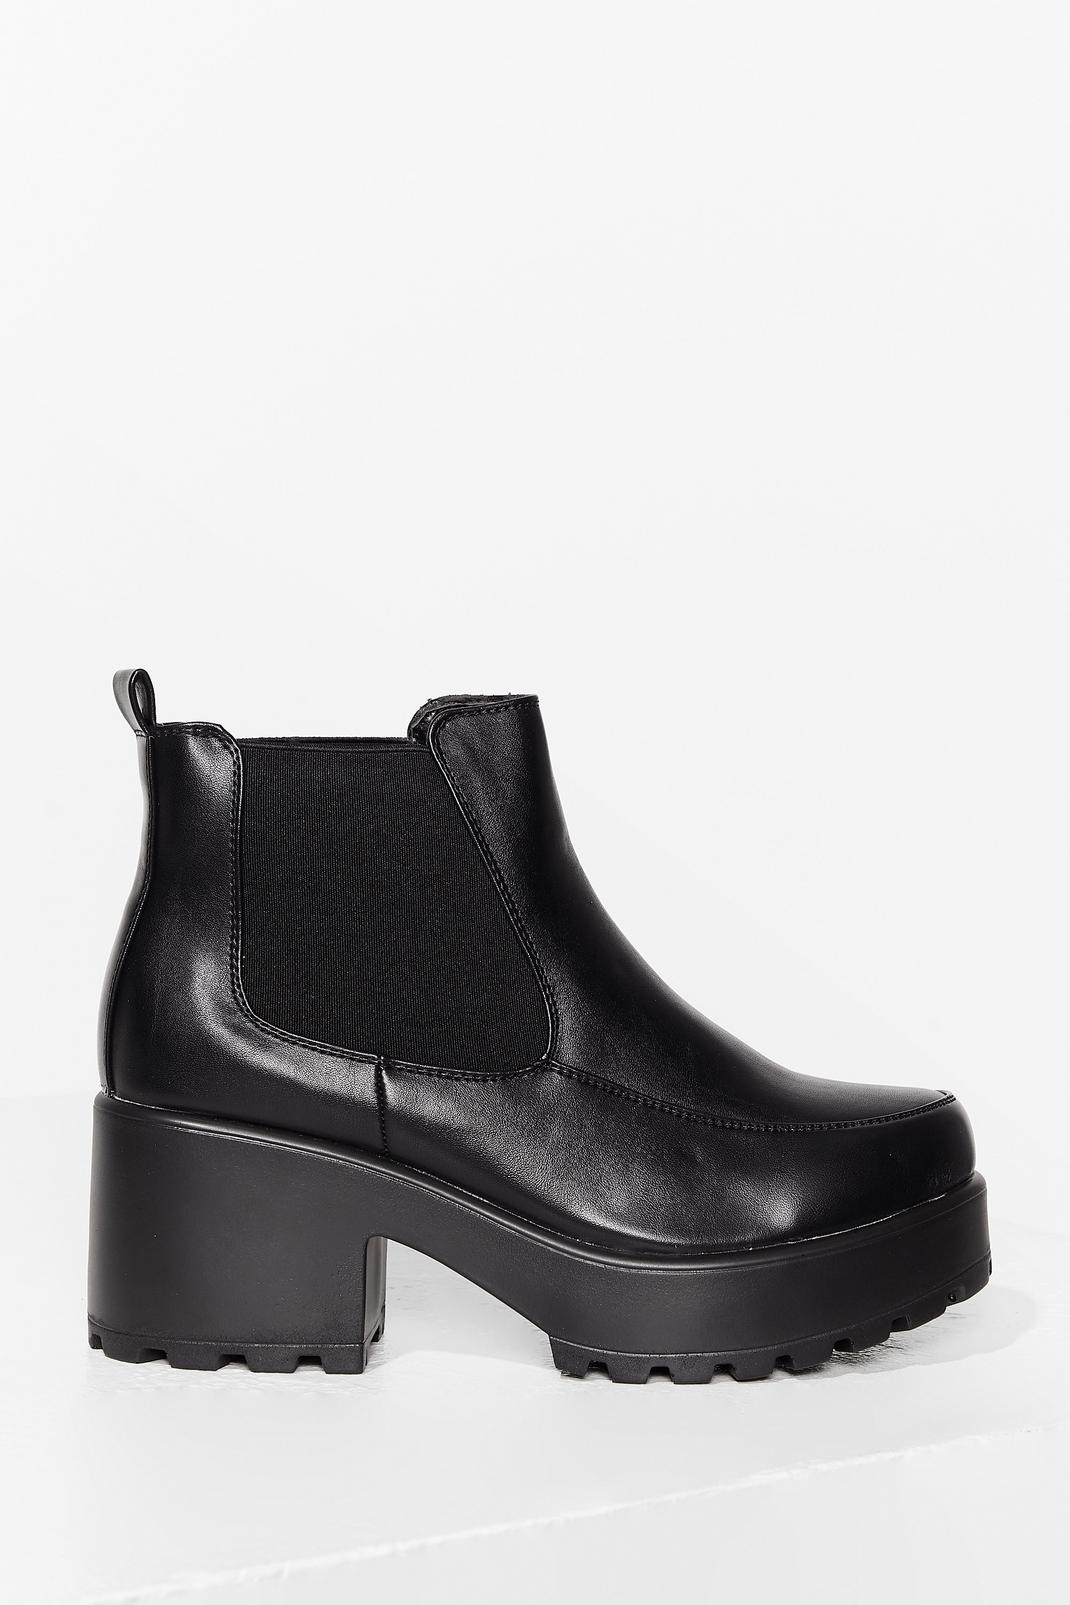 Kick Back and Relax Faux Leather Chelsea Boots image number 1